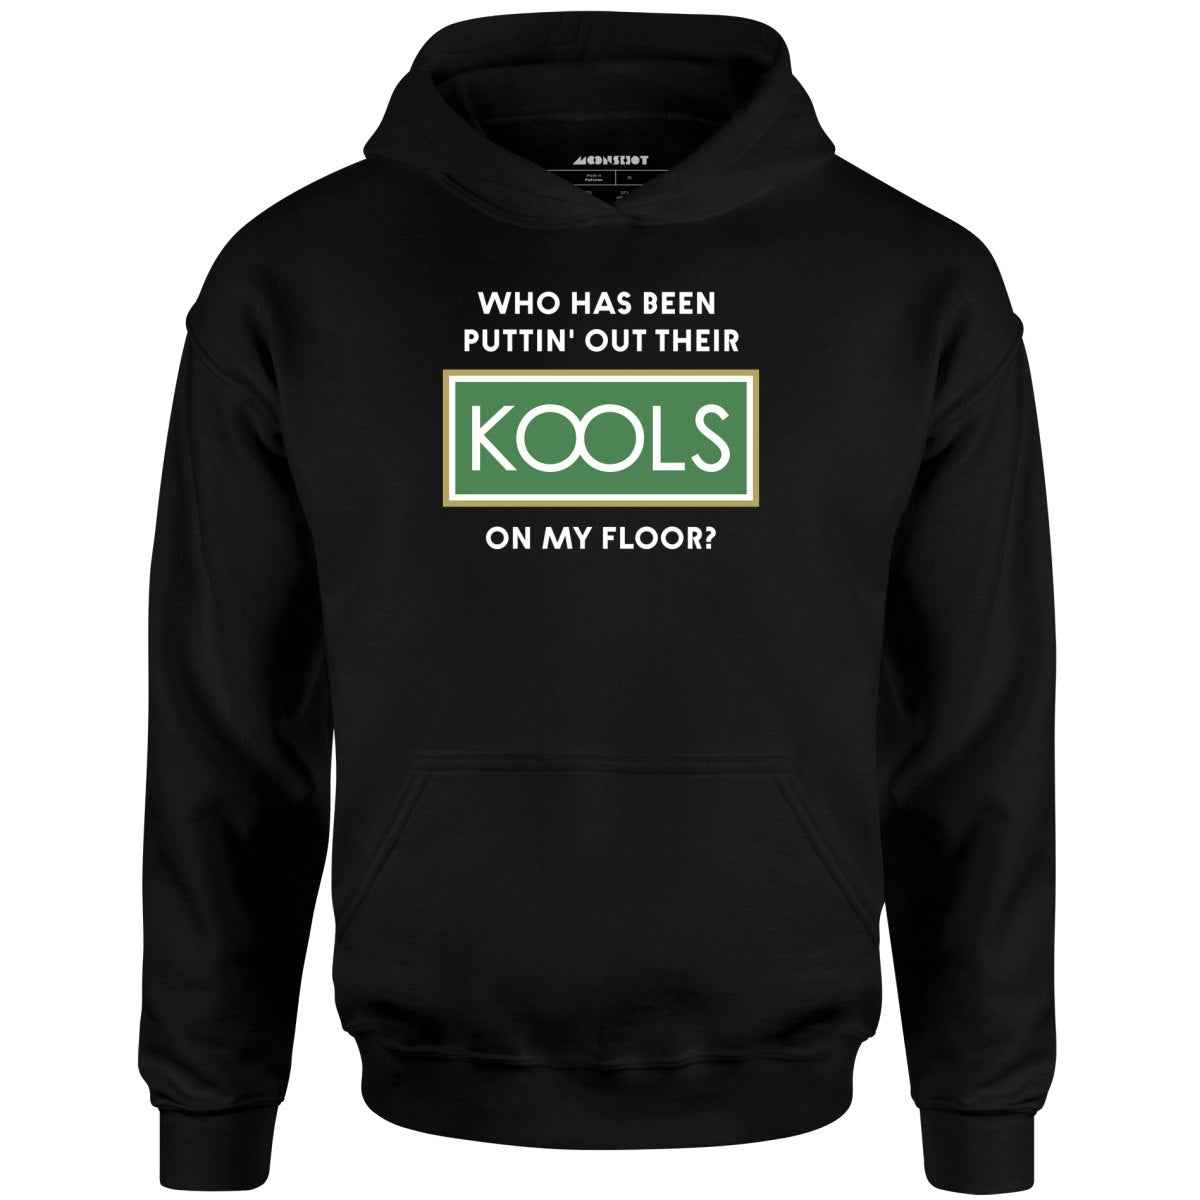 Who Has Been Puttin' Out Their Kools On My Floor? - Unisex Hoodie